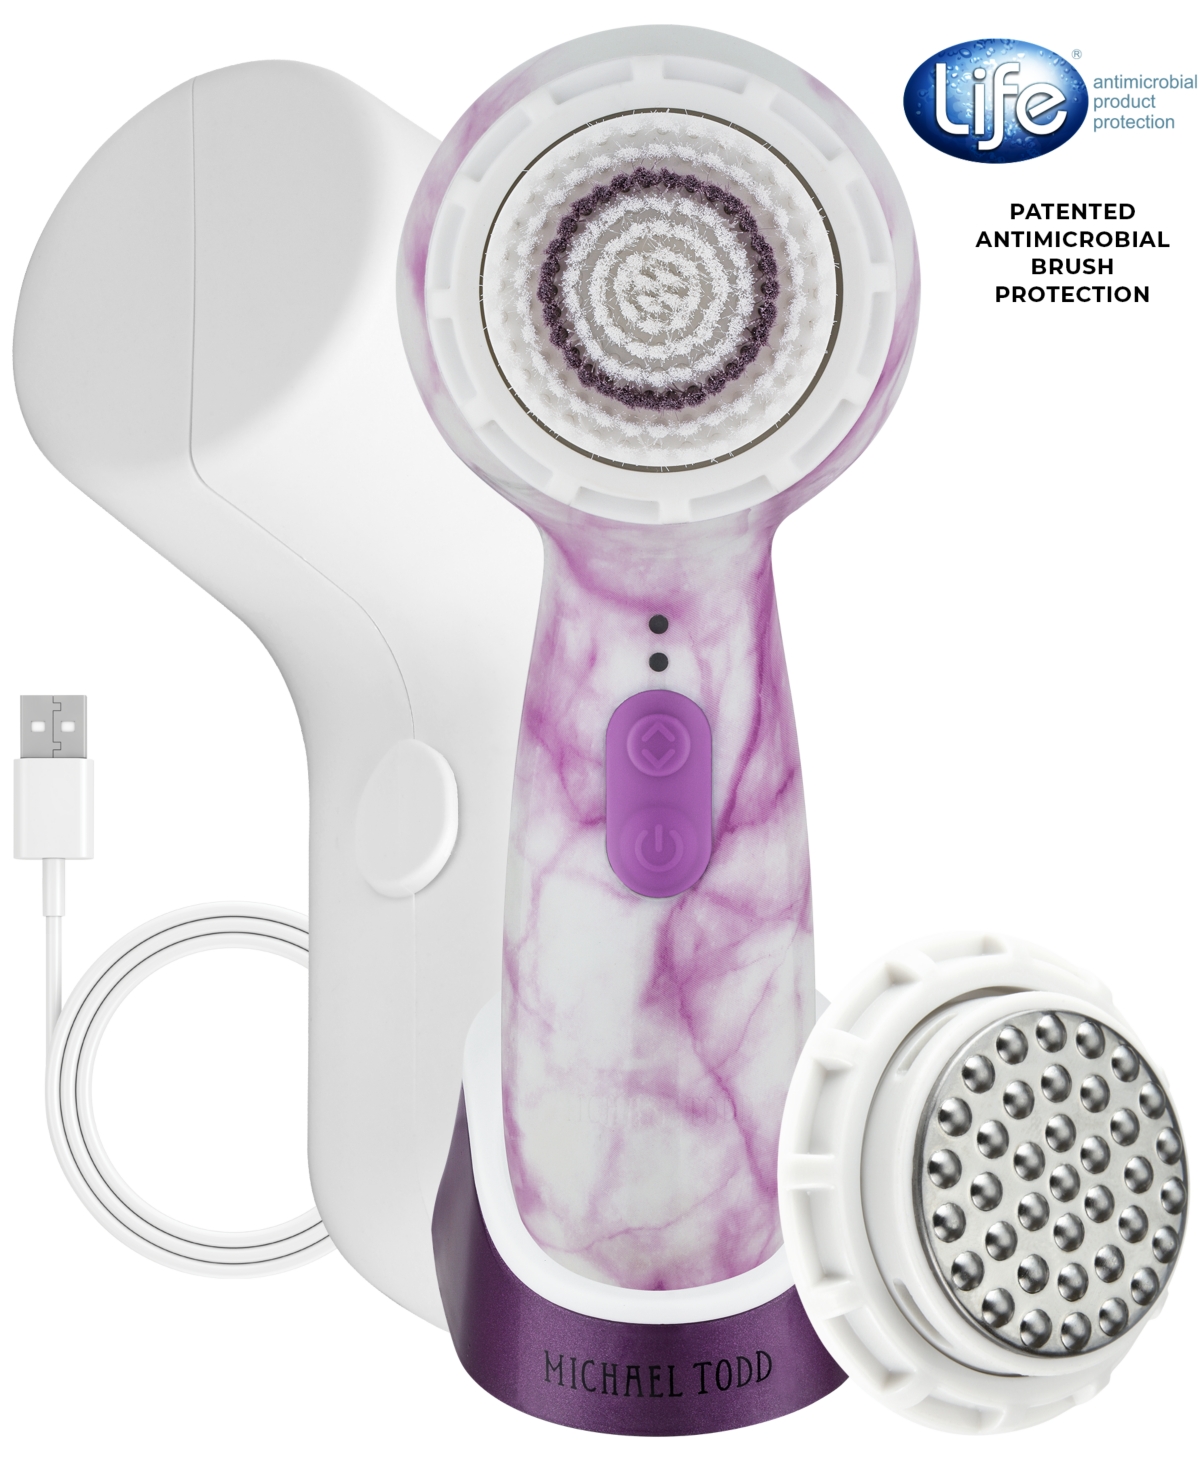 Soniclear Petite Antimicrobial Sonic Skin Cleansing Brush - Purple Mar